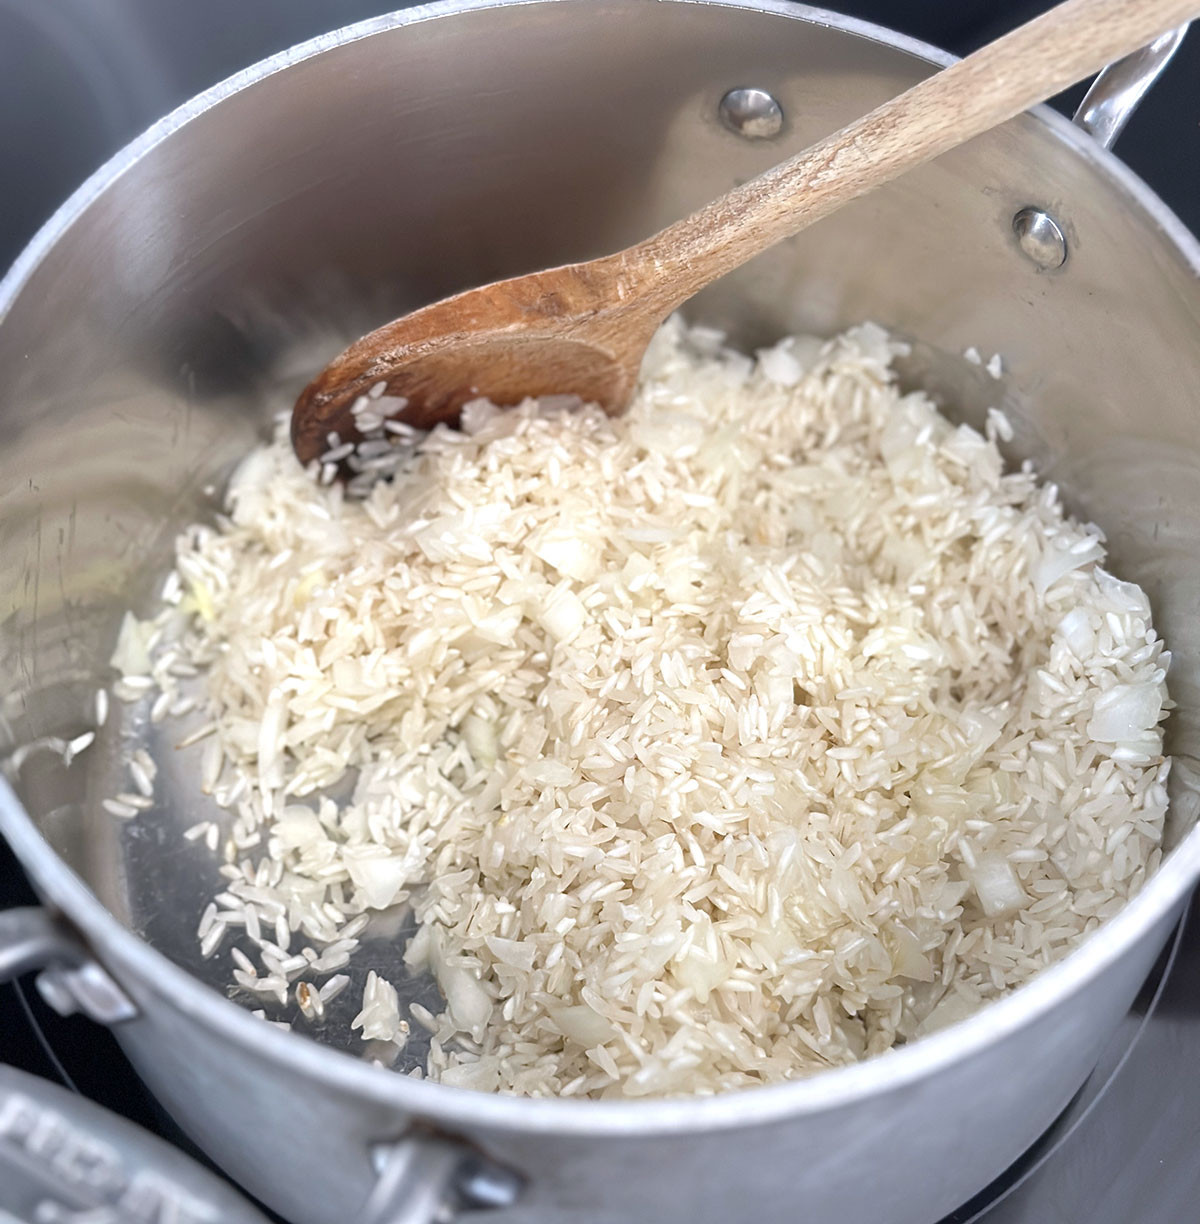 Stainless steel pot with wood spoons stirring white rice and onions.